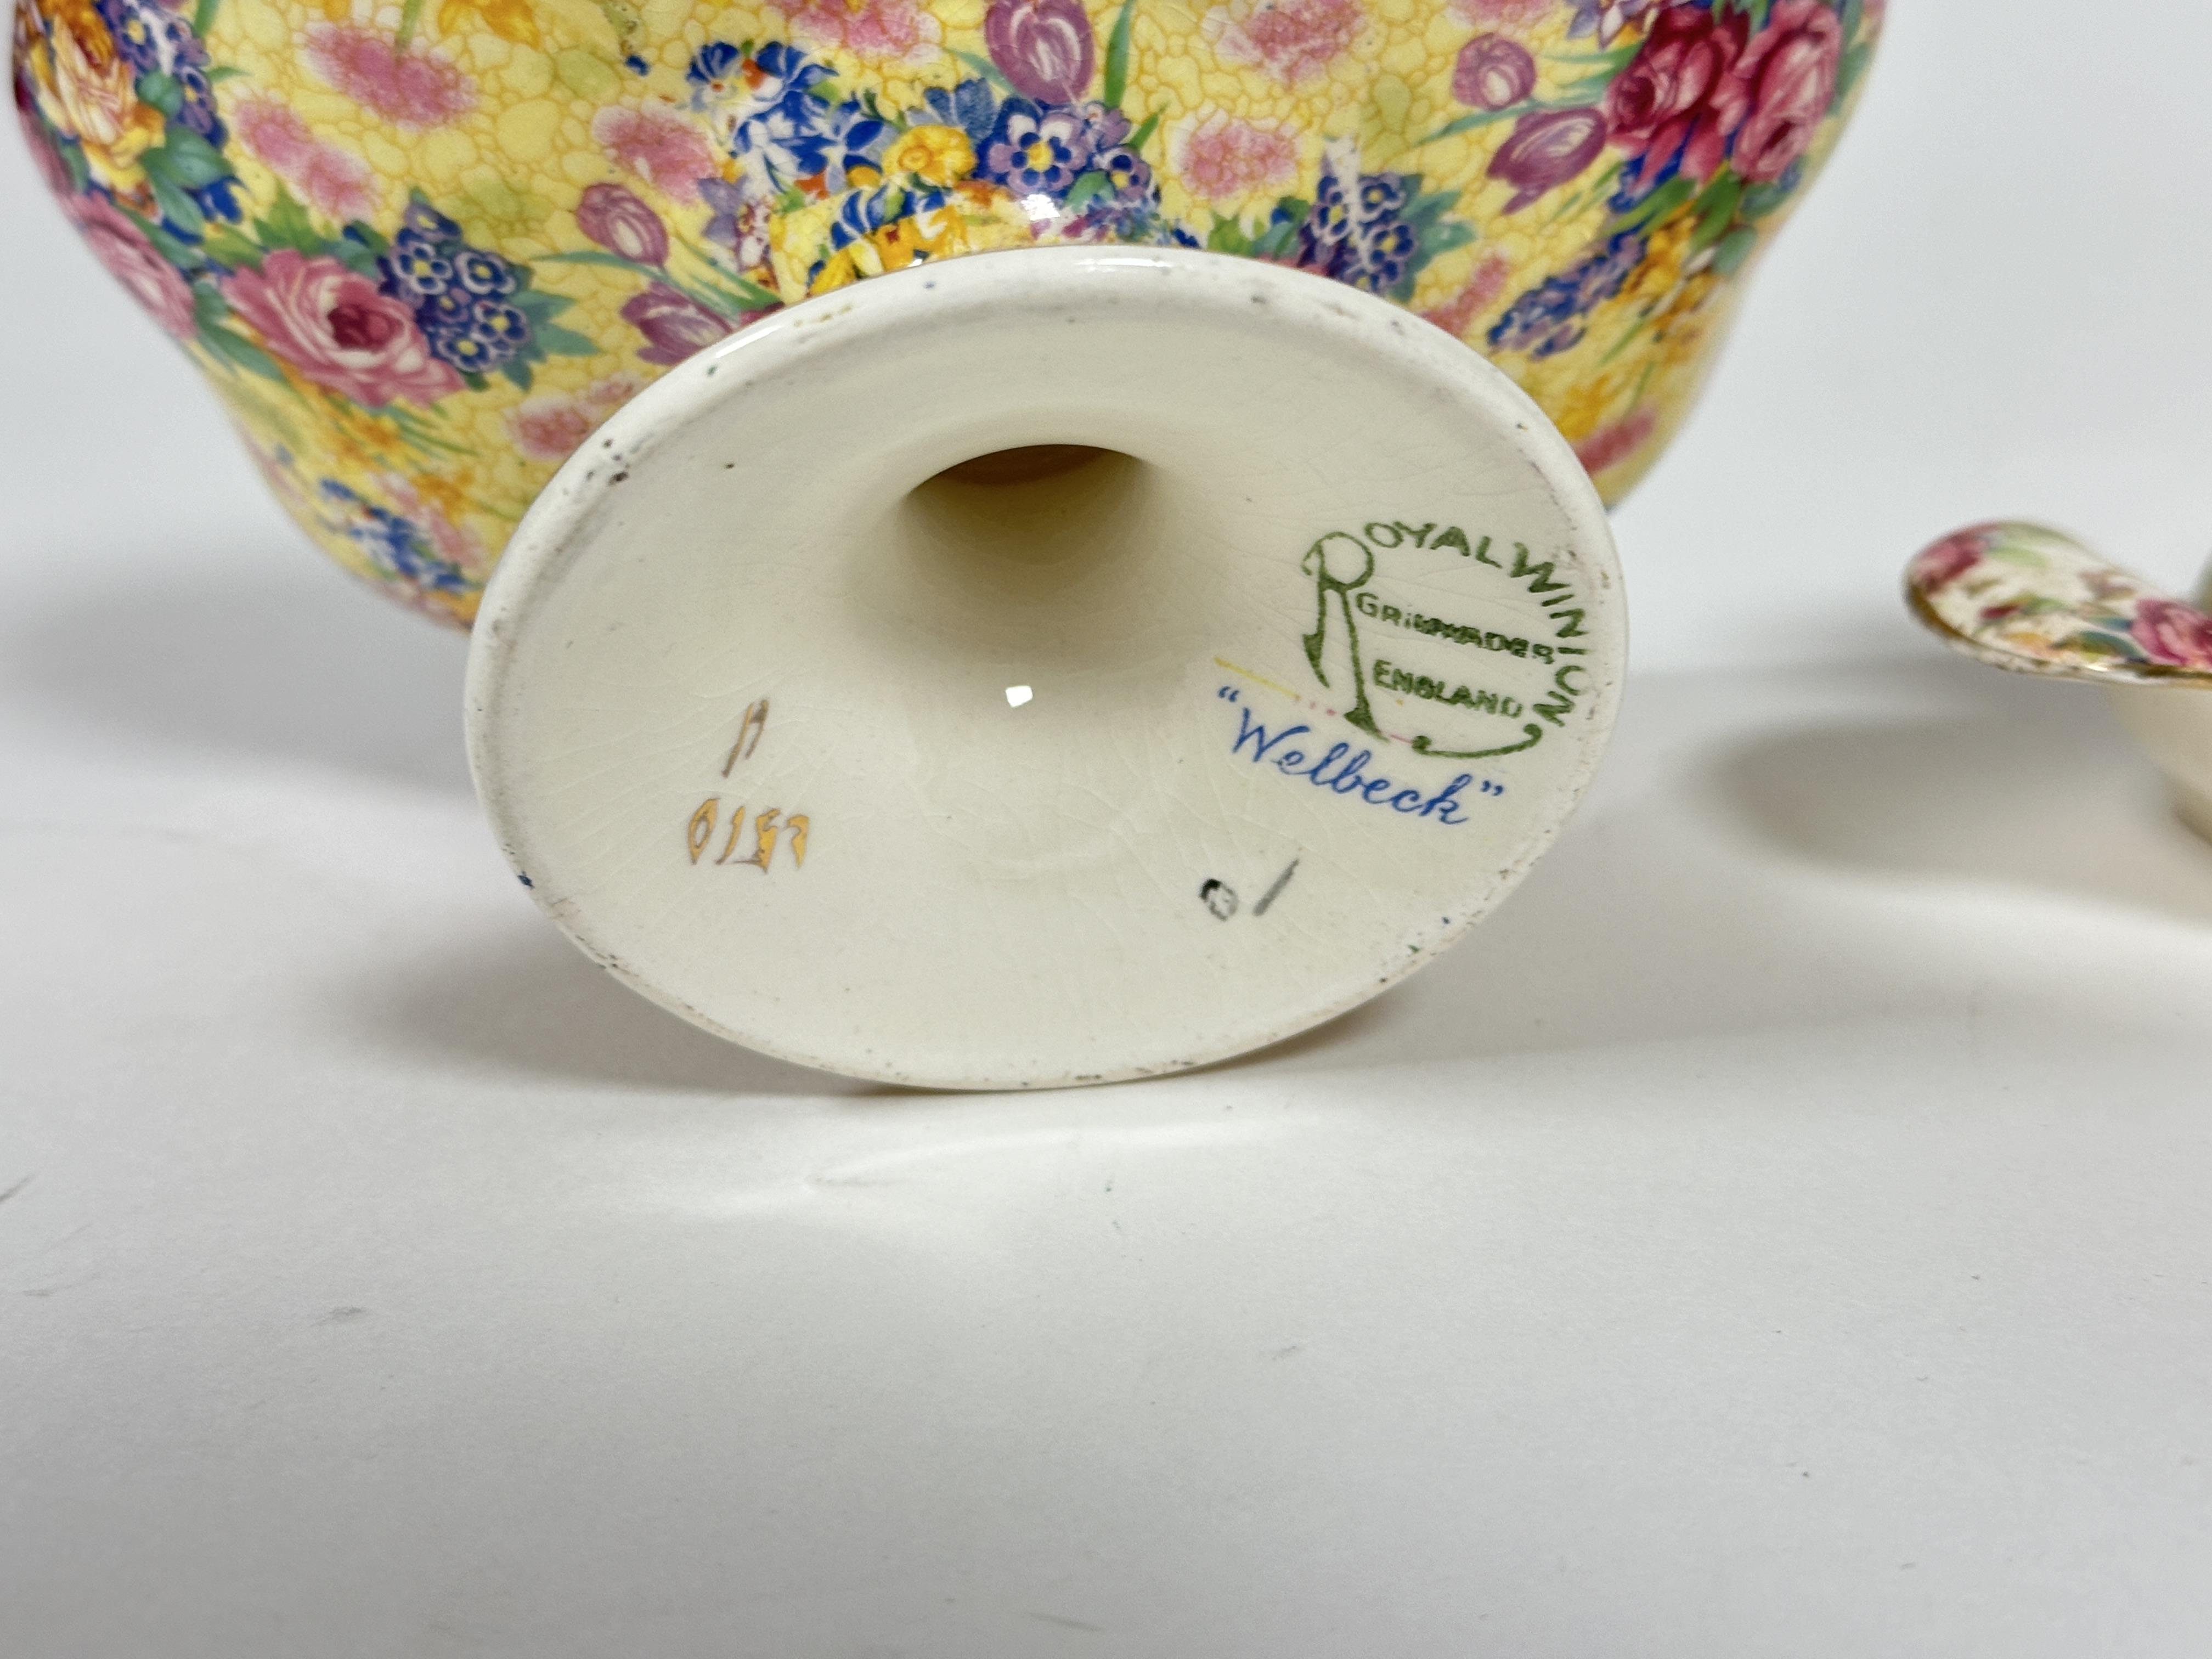 A Royal Winton Welbeck pattern Chintz ware comport shows no signs of damage or repairs H x 8.5cm D - Image 5 of 5